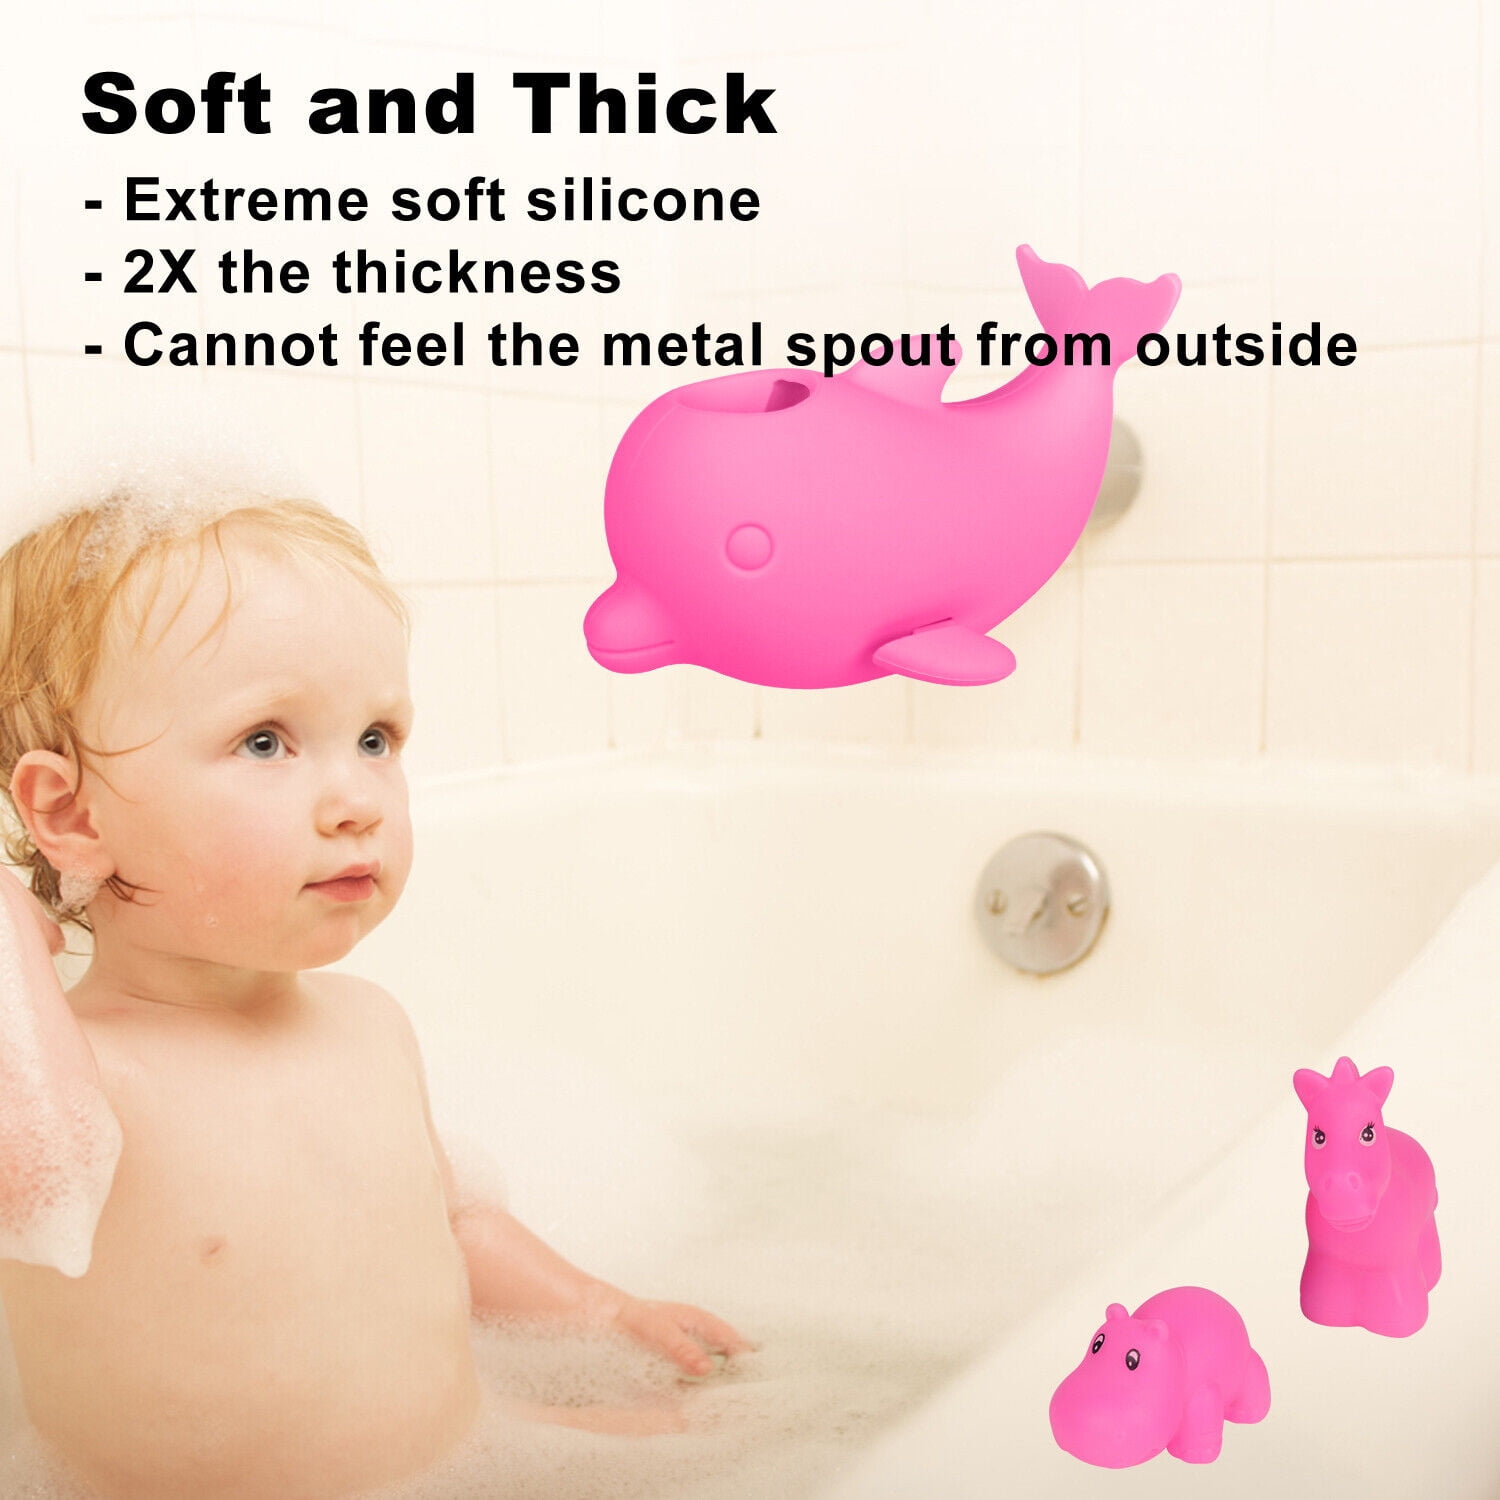 Faucet Extender Silicone Faucet Cover Faucet Extender for Toddlers Babies Kids Children Pink 